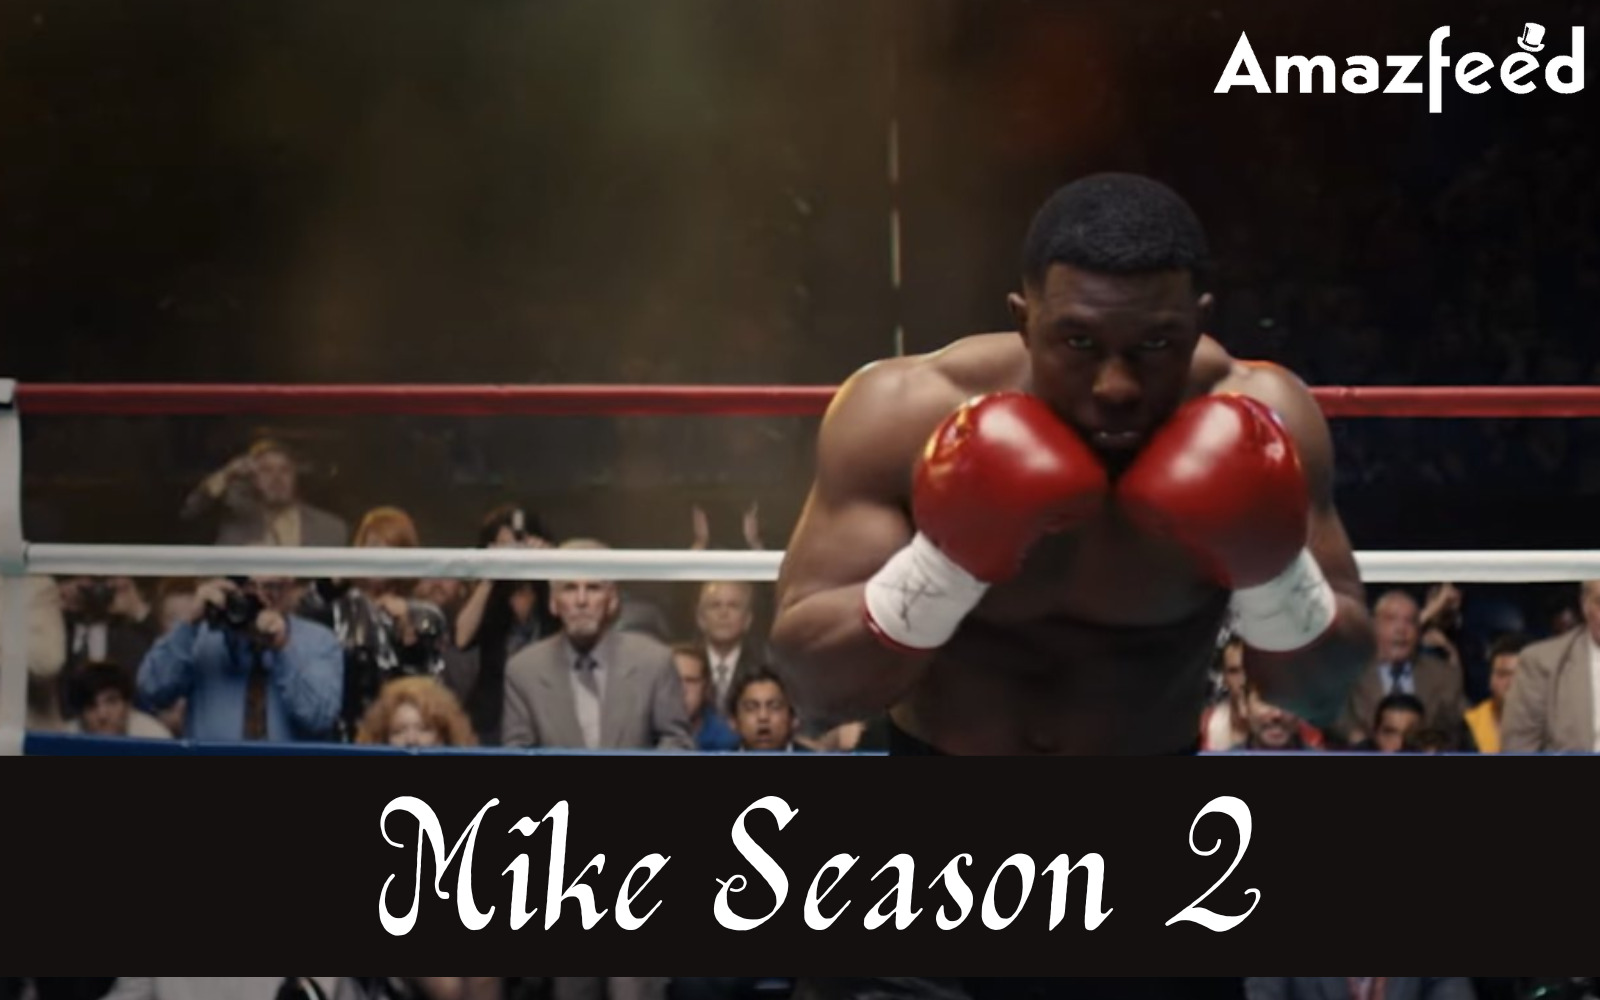 How many Episodes of Mike Season 2 will be there